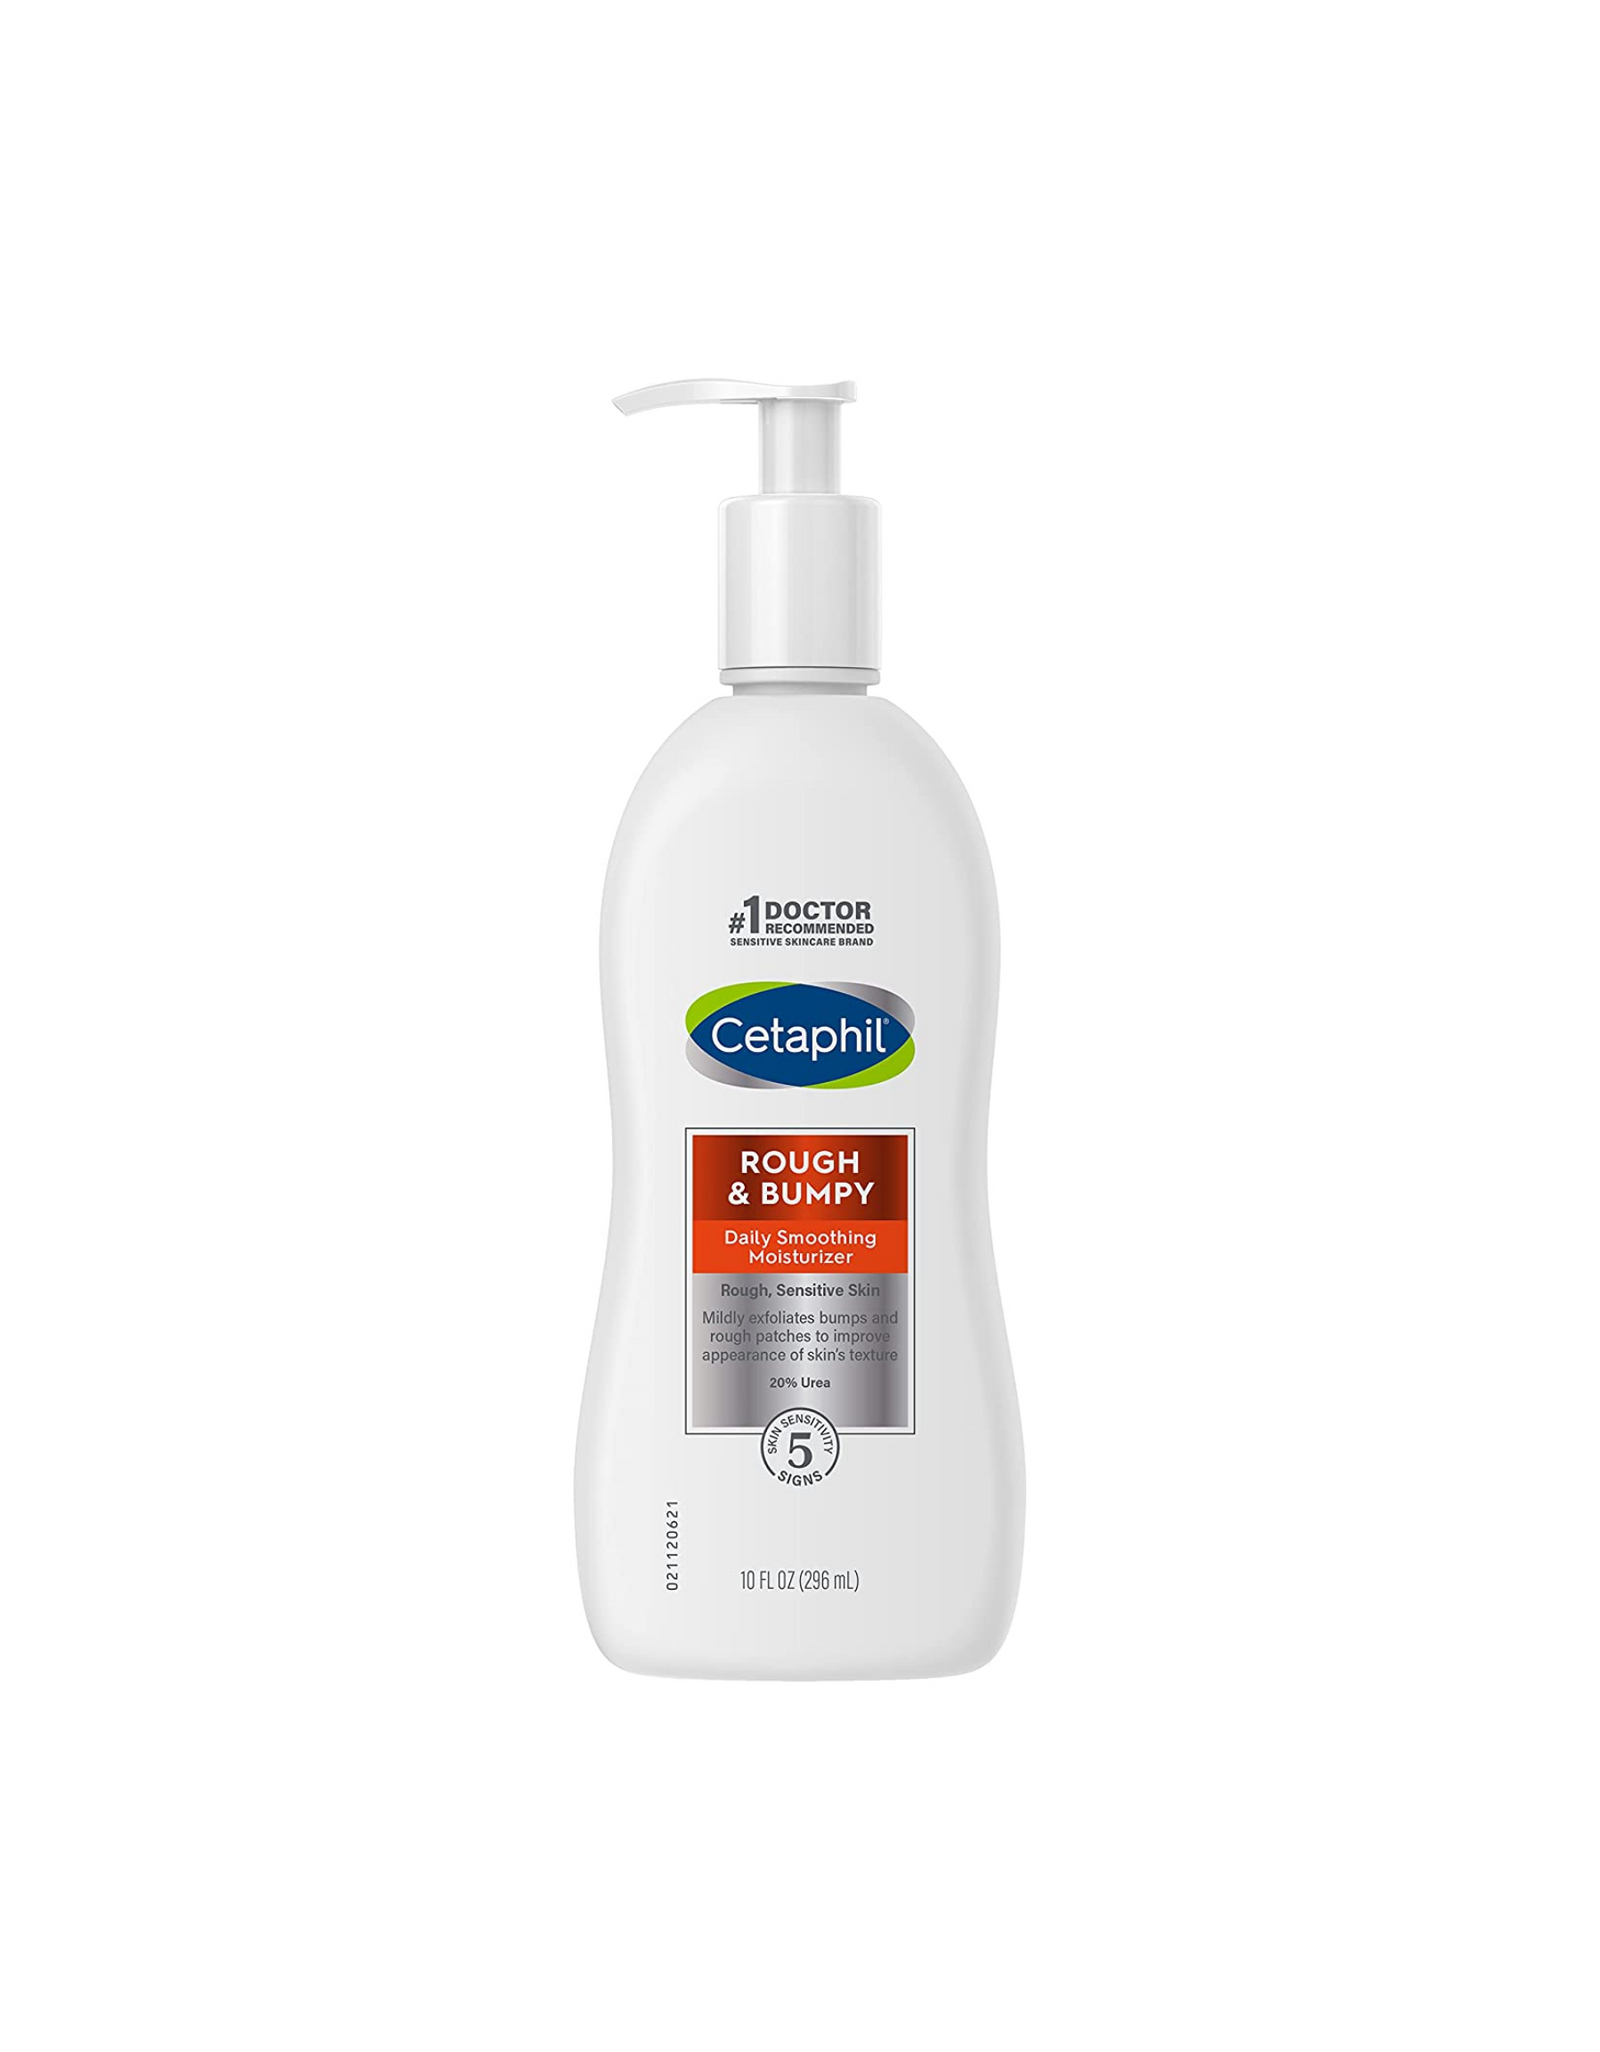 CETAPHIL Daily Smoothing Moisturizer, 10 fl oz - for Rough and Bumpy Skin